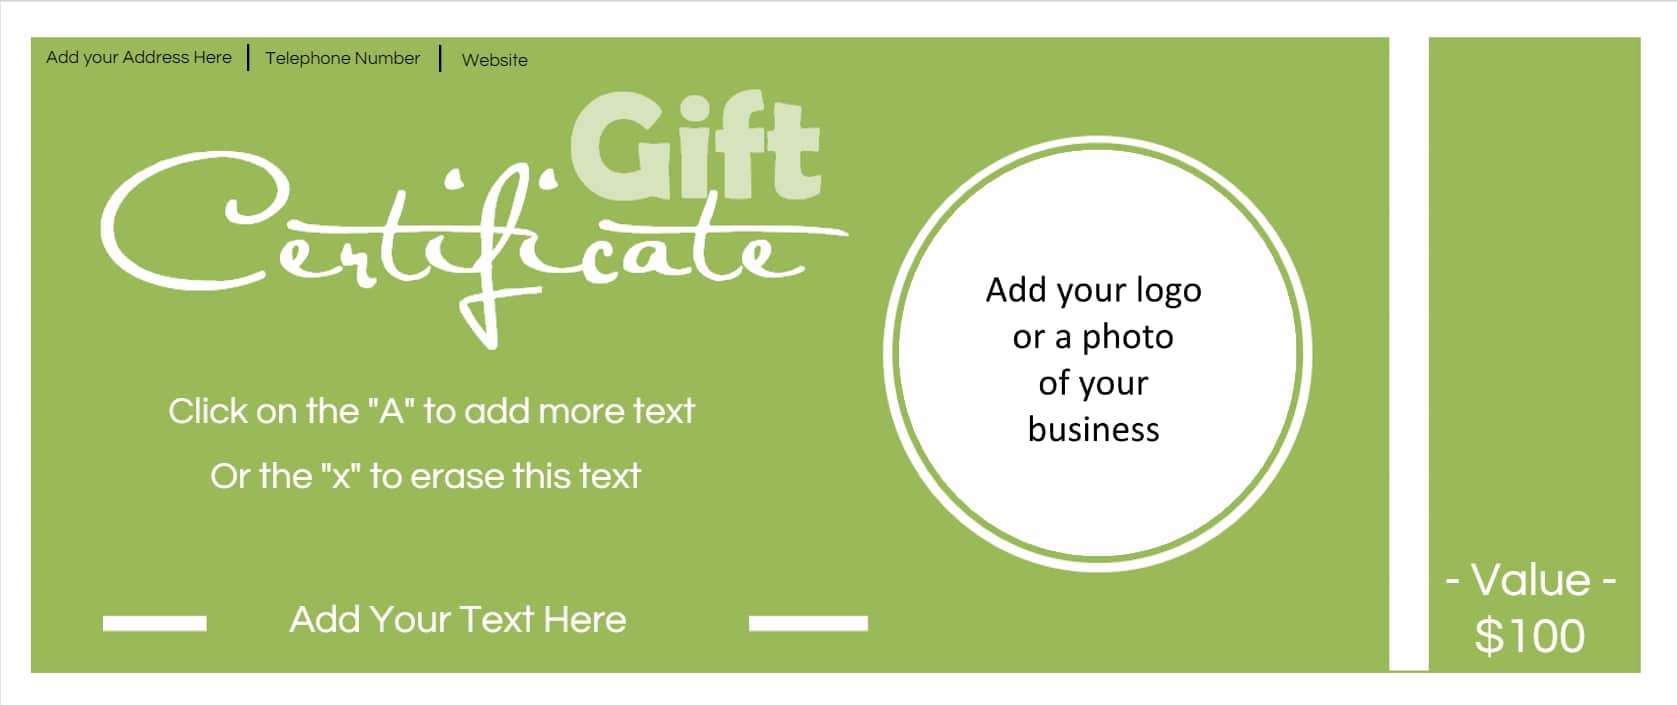 FREE Business Gift Certificate Template Customize Online